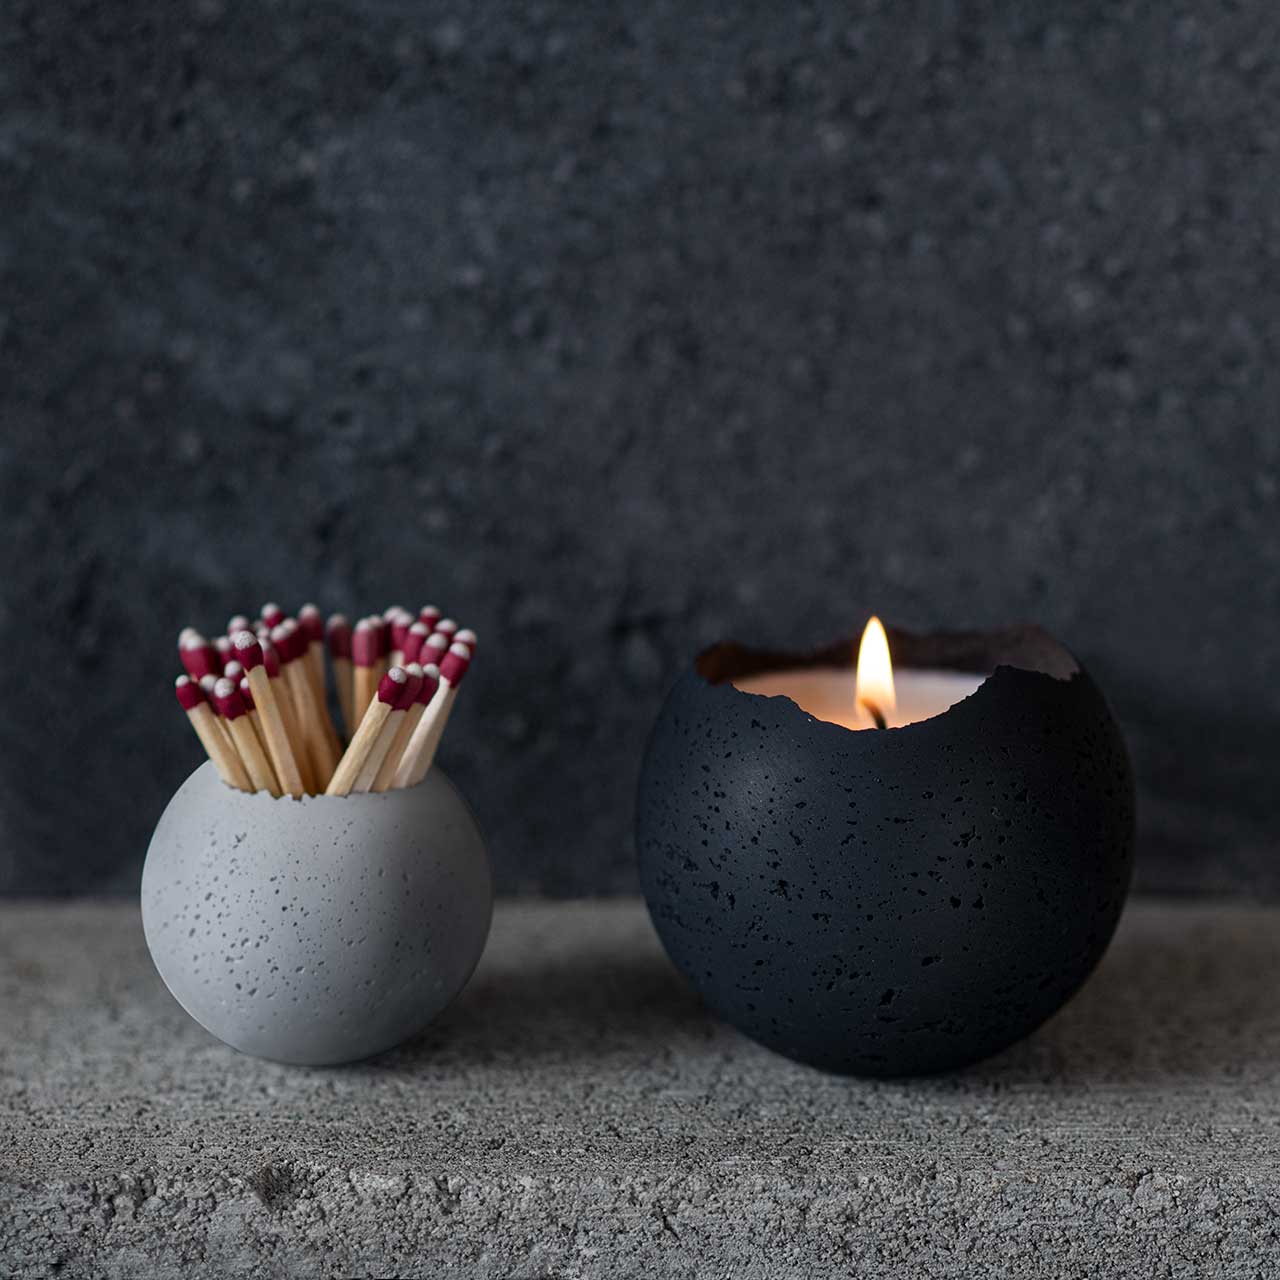 KONZUK Launches Orbis Household Collection of Vessels + Candles